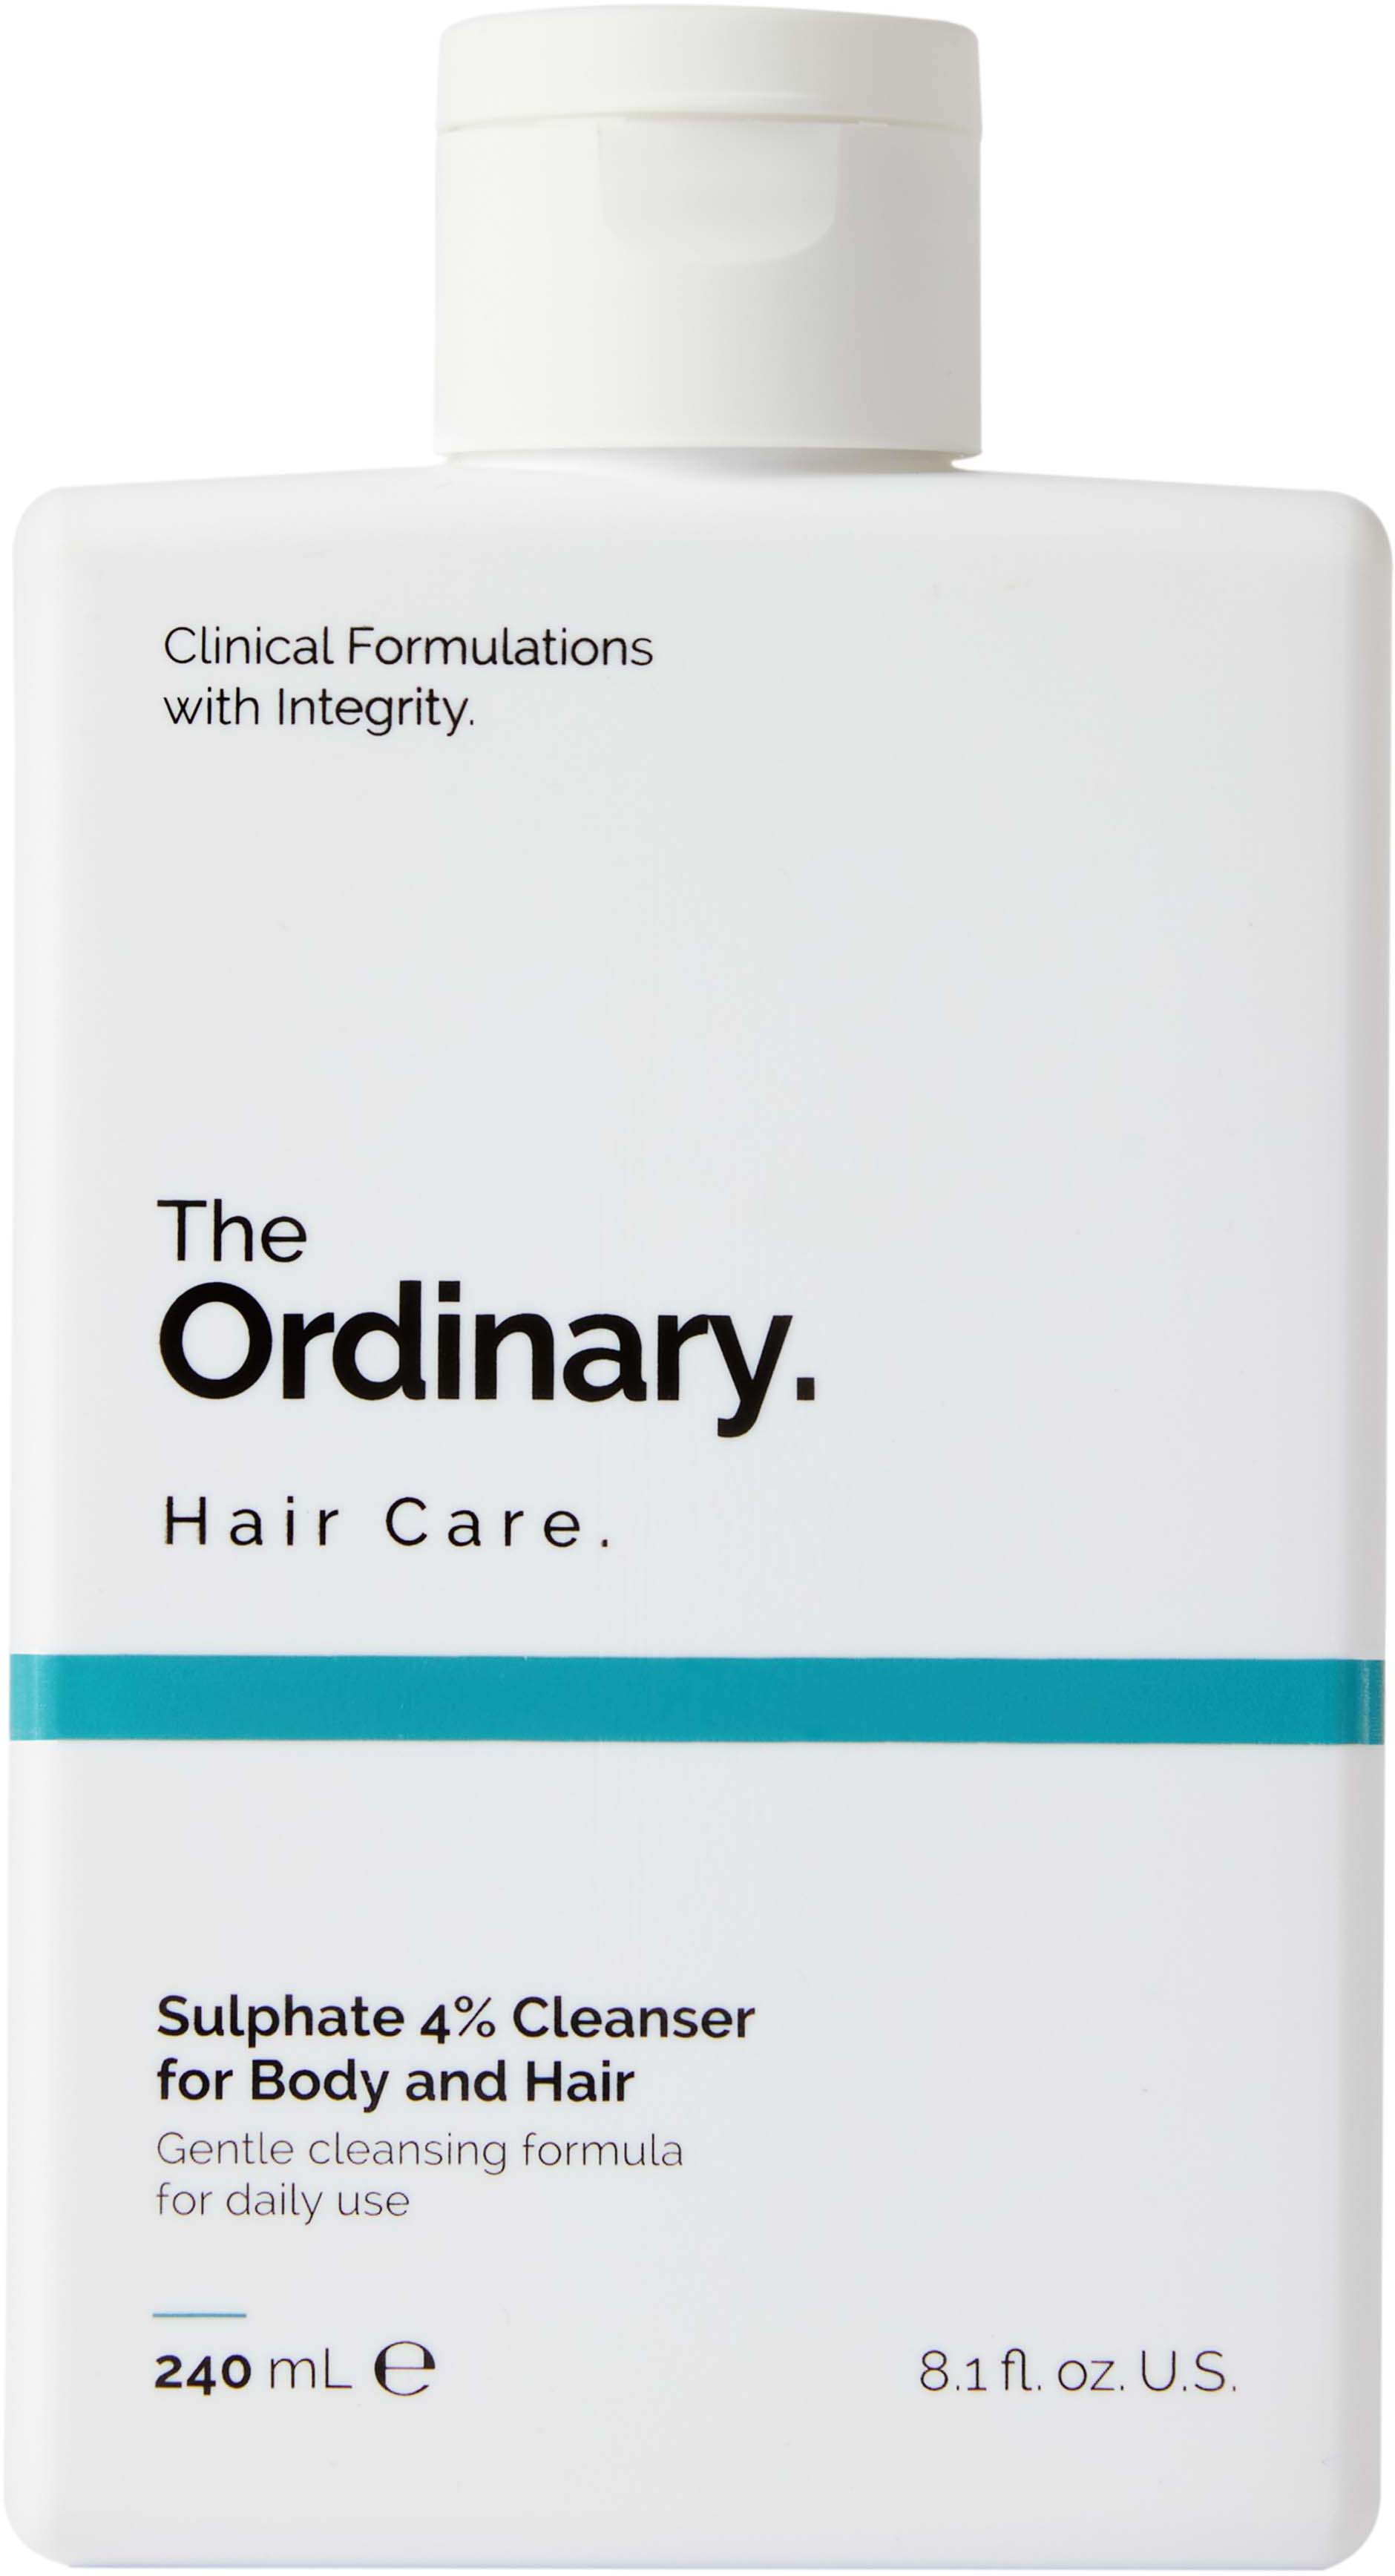 The Ordinary Hair Care 4% Sulphate Cleanser for Body and Hair 240 ml